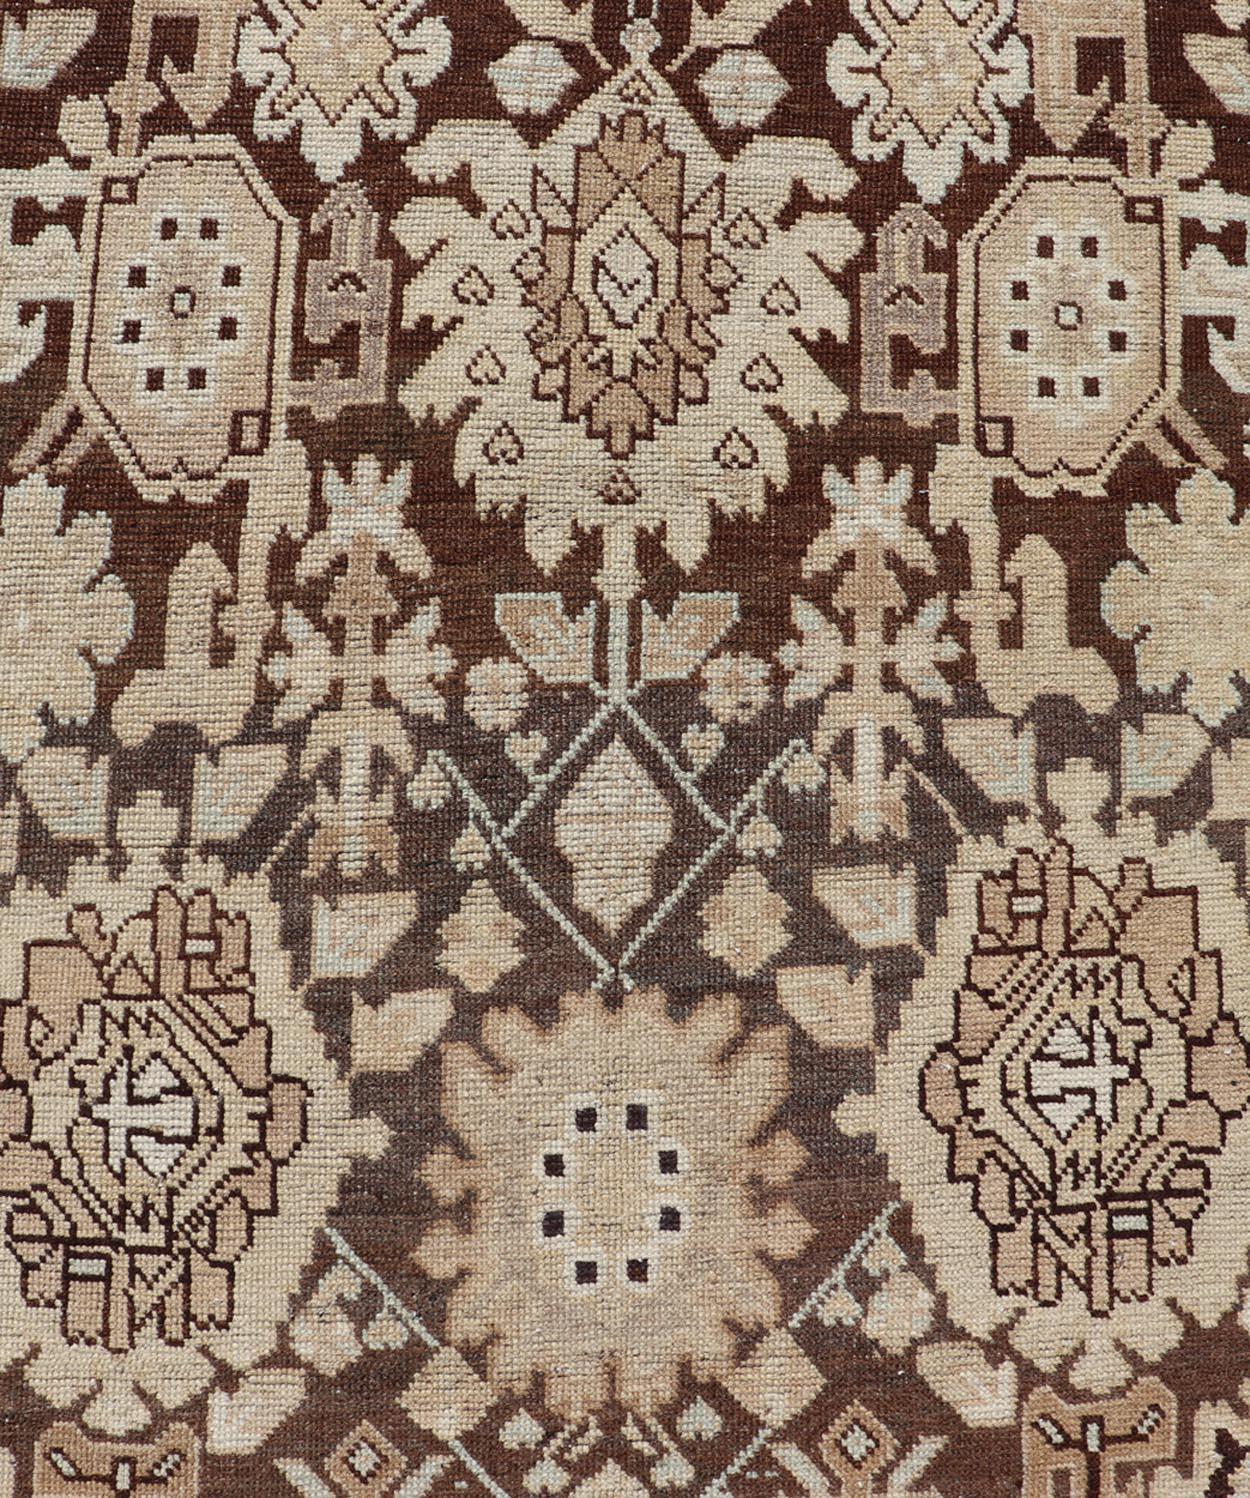 Antique Karabagh Runner with All-Over Floral Medallion Design in Brown and Tan In Good Condition For Sale In Atlanta, GA